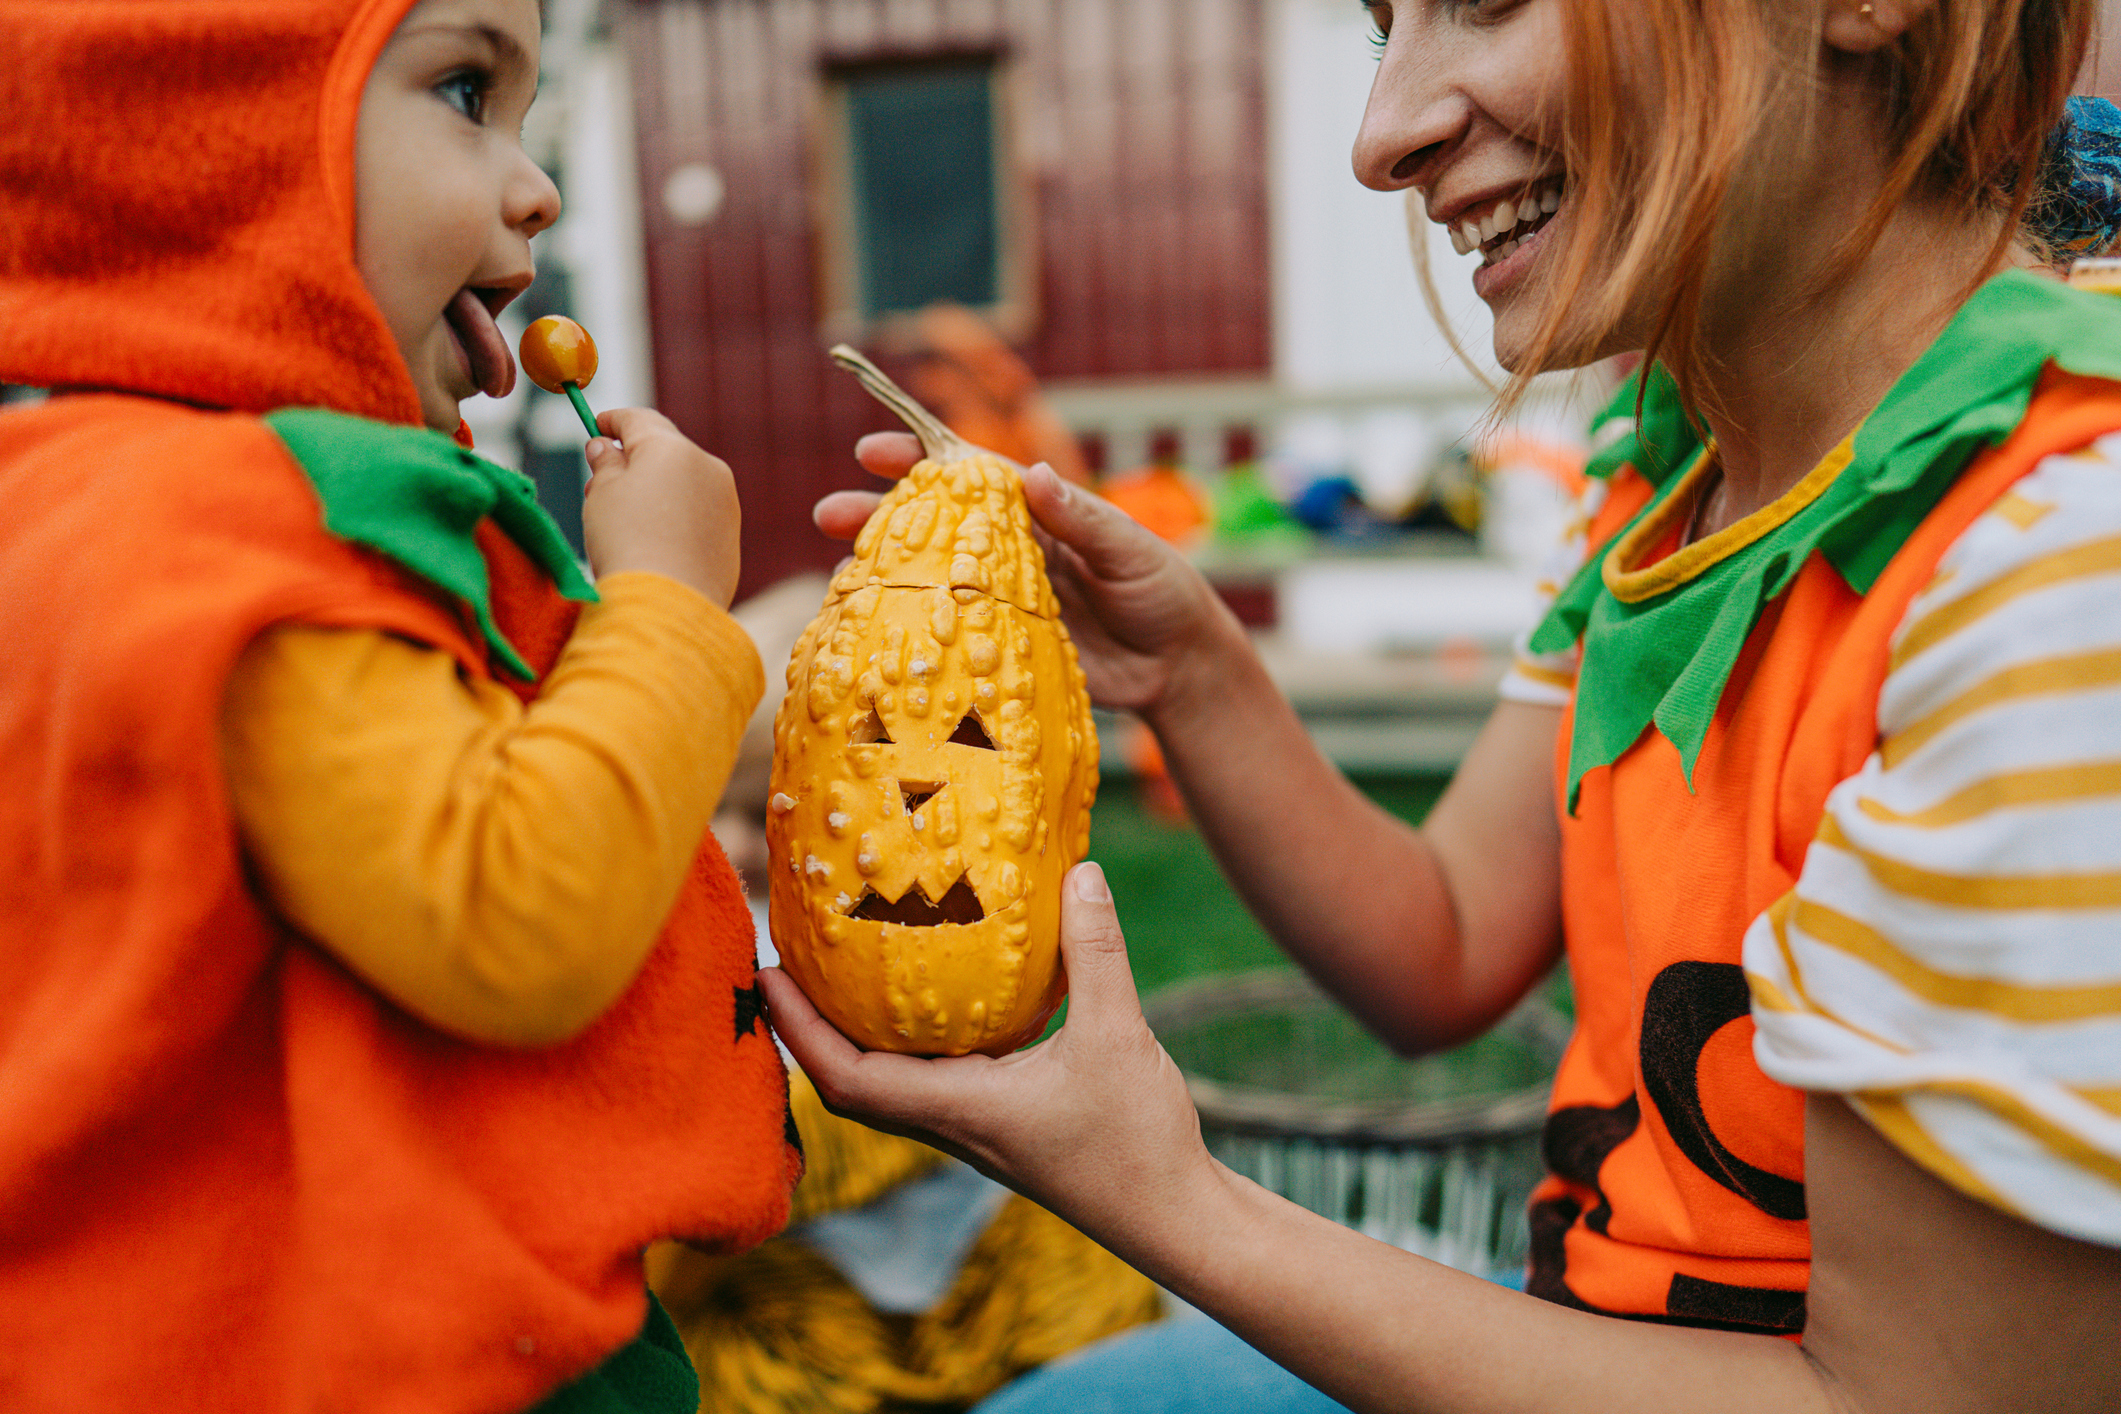 Mom handing a pumpkin to a kid eating candy